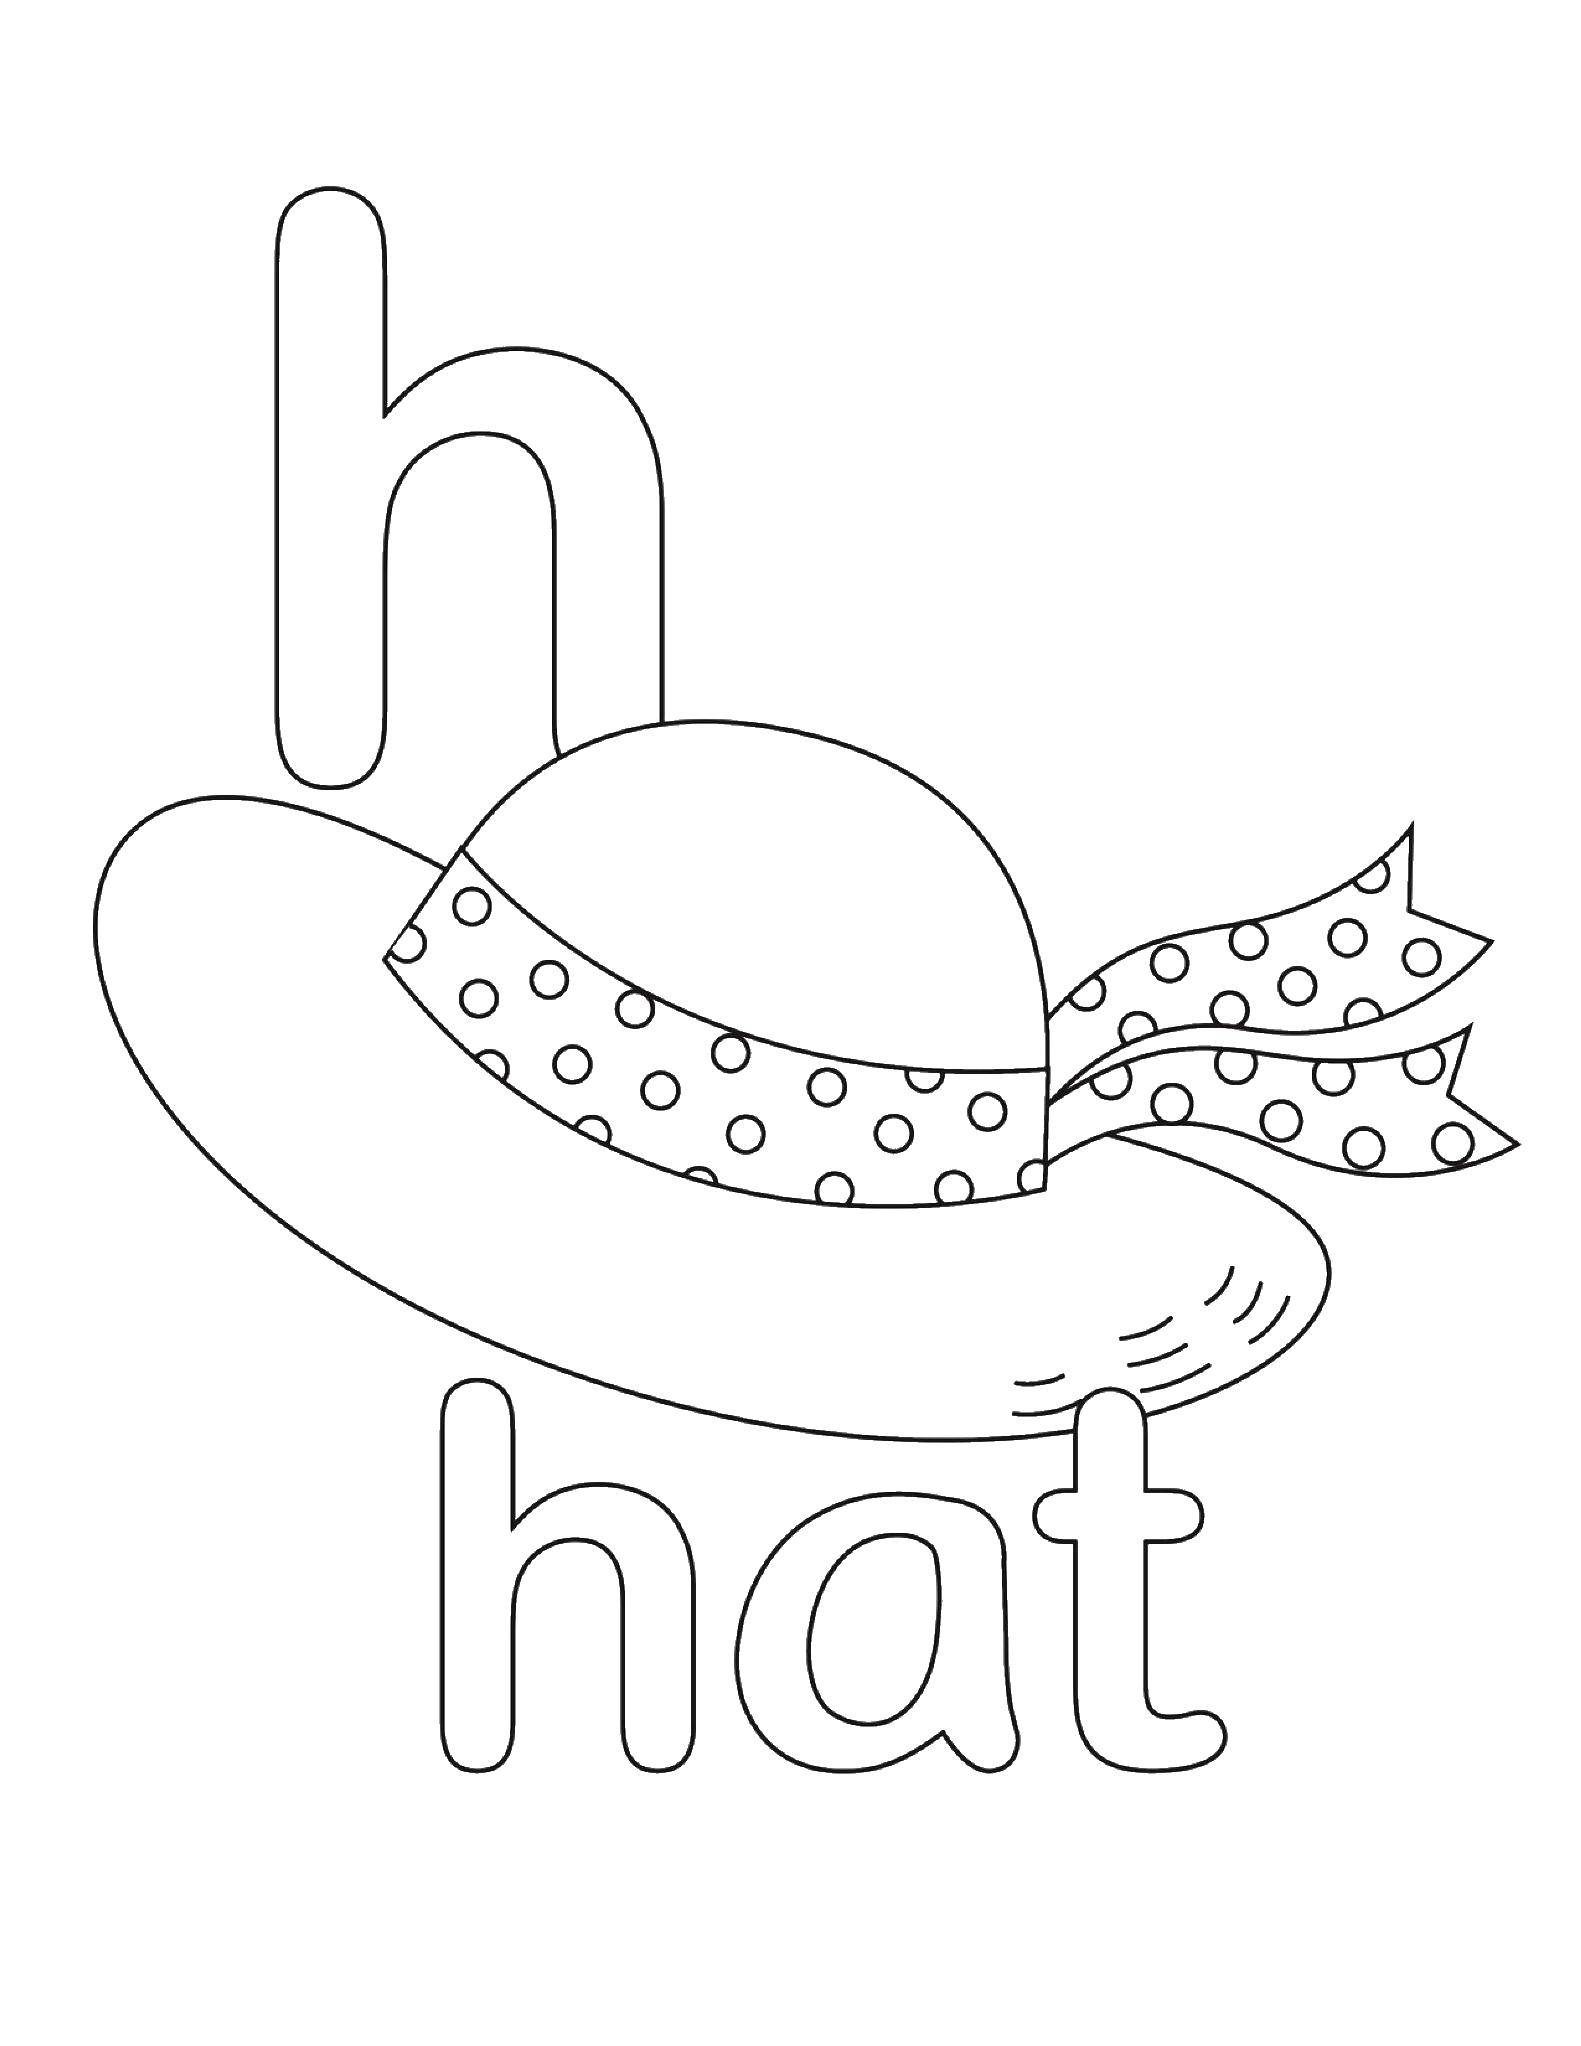 Coloring Hat. Category English words. Tags:  English words, hat.